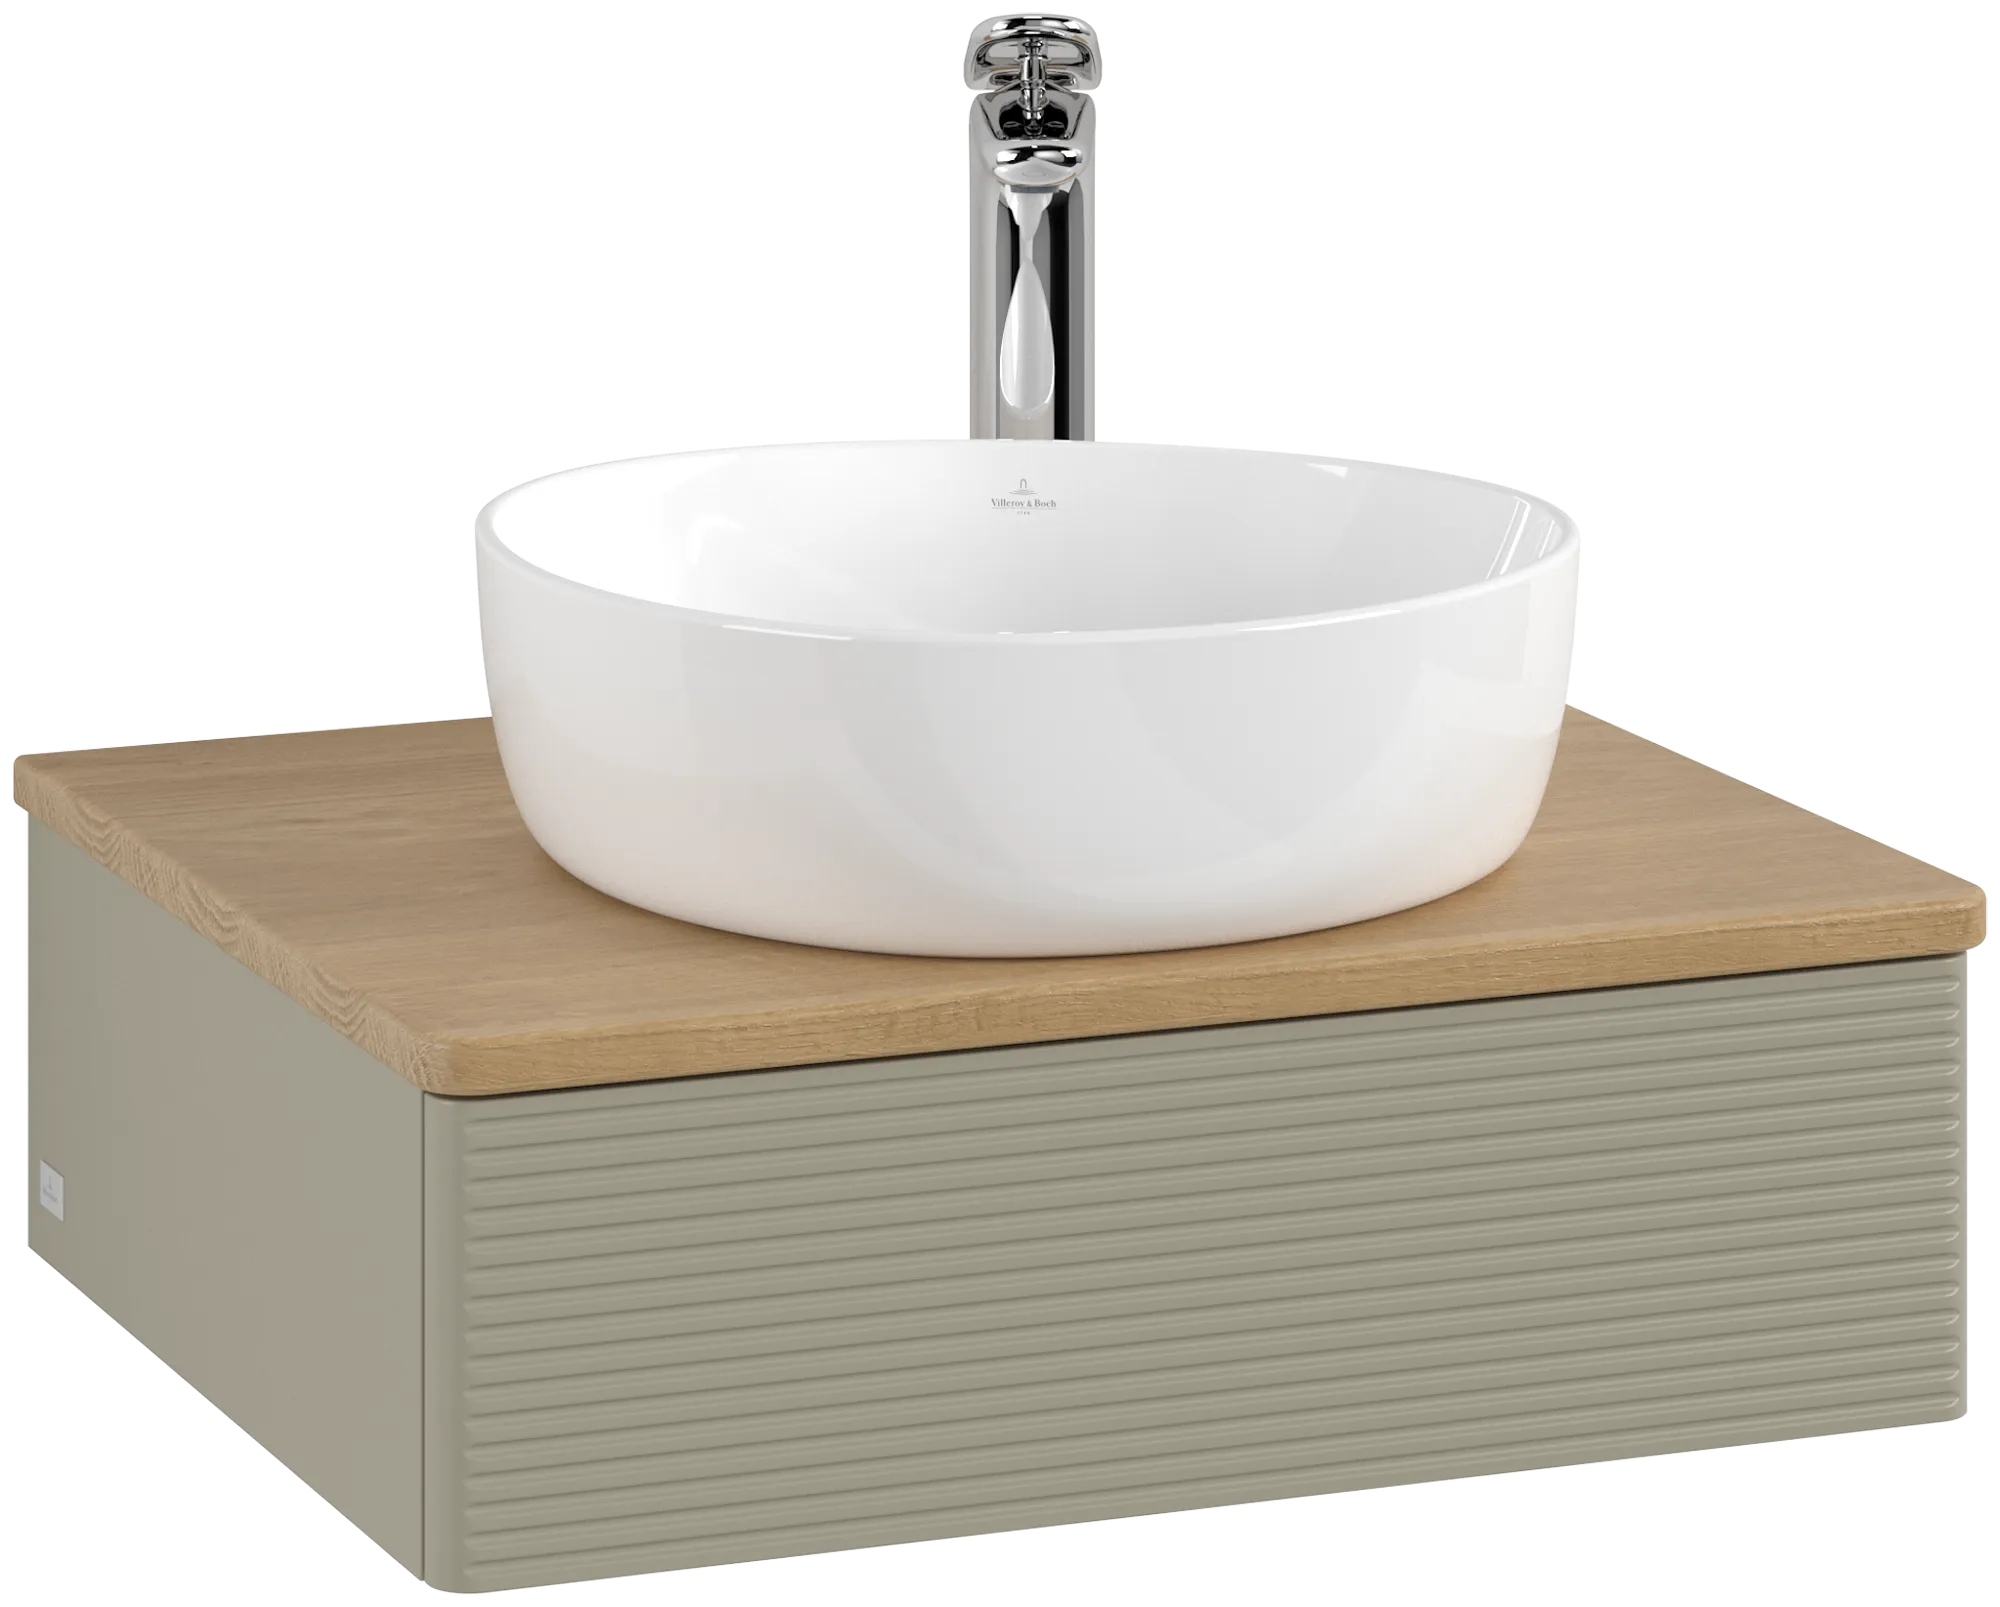 Picture of VILLEROY BOCH Antao Vanity unit, with lighting, 1 pull-out compartment, 600 x 190 x 500 mm, Front with grain texture, Stone Grey Matt Lacquer / Honey Oak #L07151HK